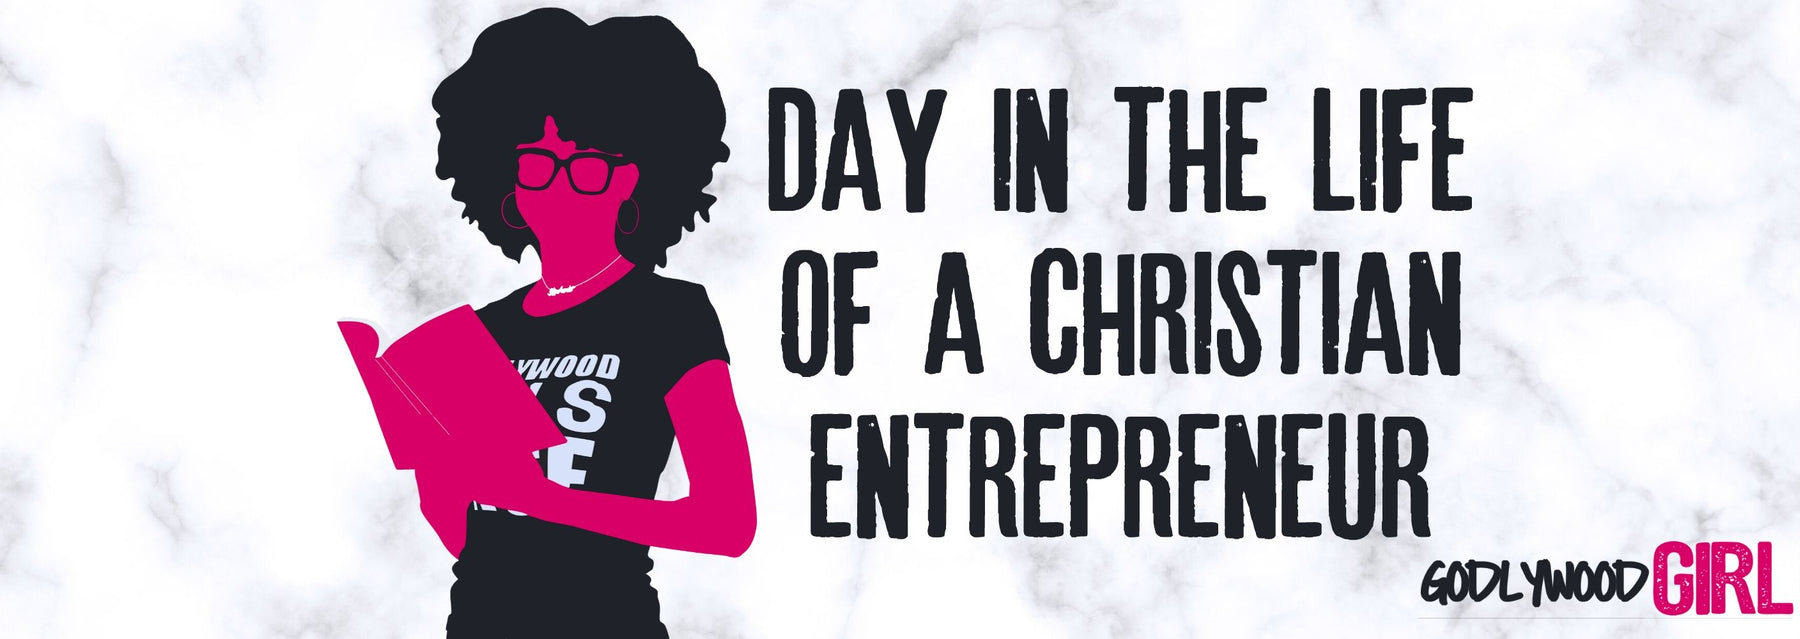 VLOG | DAY IN A LIFE OF A CHRISTIAN ENTREPRENEUR (Godlywood Girl #103) | First Day Writing My Novel!